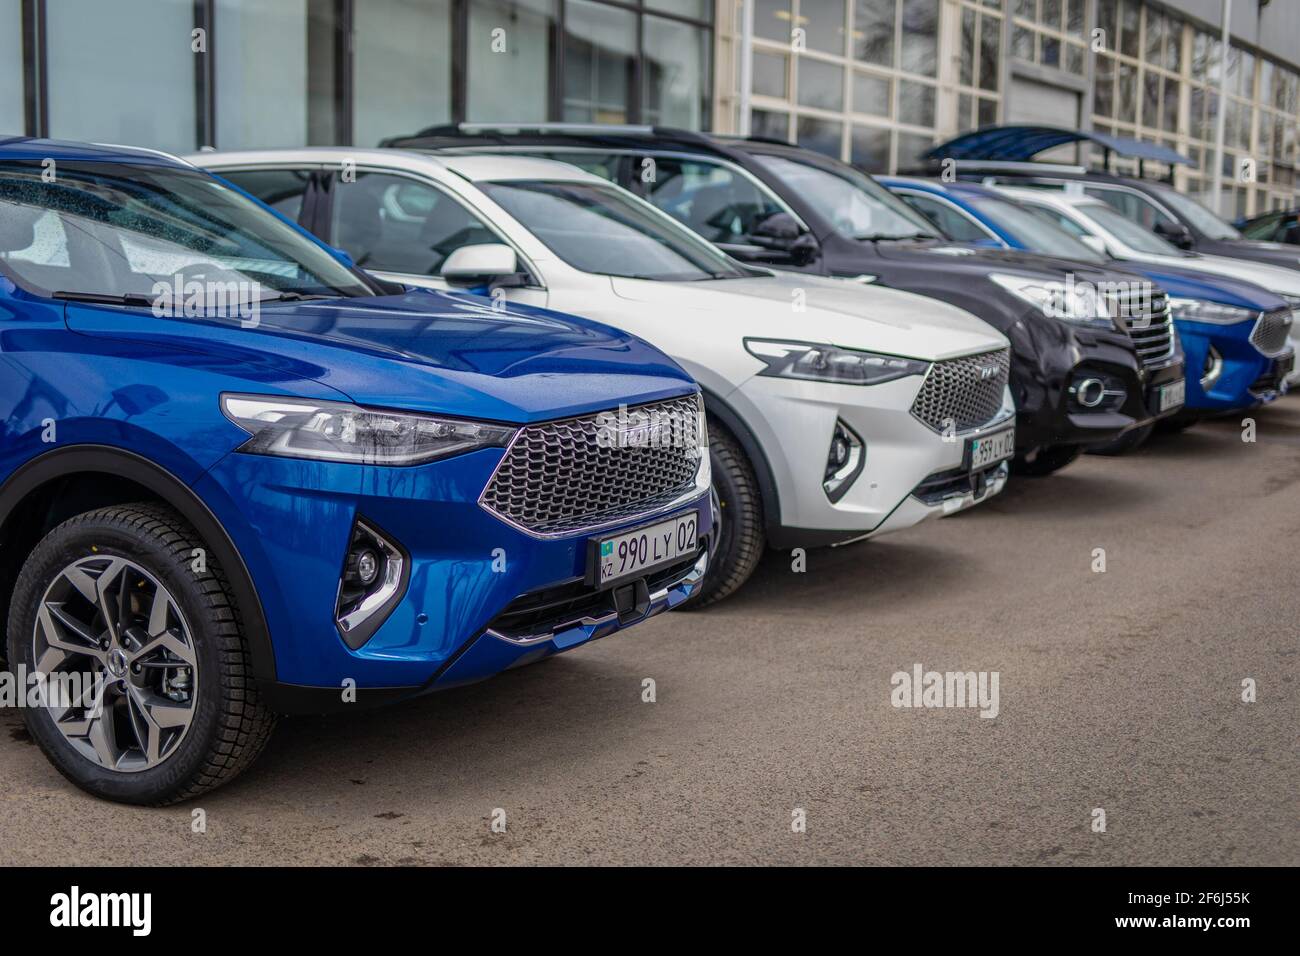 (210401) -- ALMATY, April 1, 2021 (Xinhua) -- Photo taken on April 1, 2021 shows HAVAL cars outside a dealer shop in Almaty, Kazakhstan. Great Wall Motor Co., Ltd.'s HAVAL brand entered the Kazakhstan market on thursday, three main models of crossover vehicles F7, F7x and off-road vehicle H9 officially began the sales to Kazakhstan residents in Almaty. (Astana Motors/Handout via Xinhua) Stock Photo